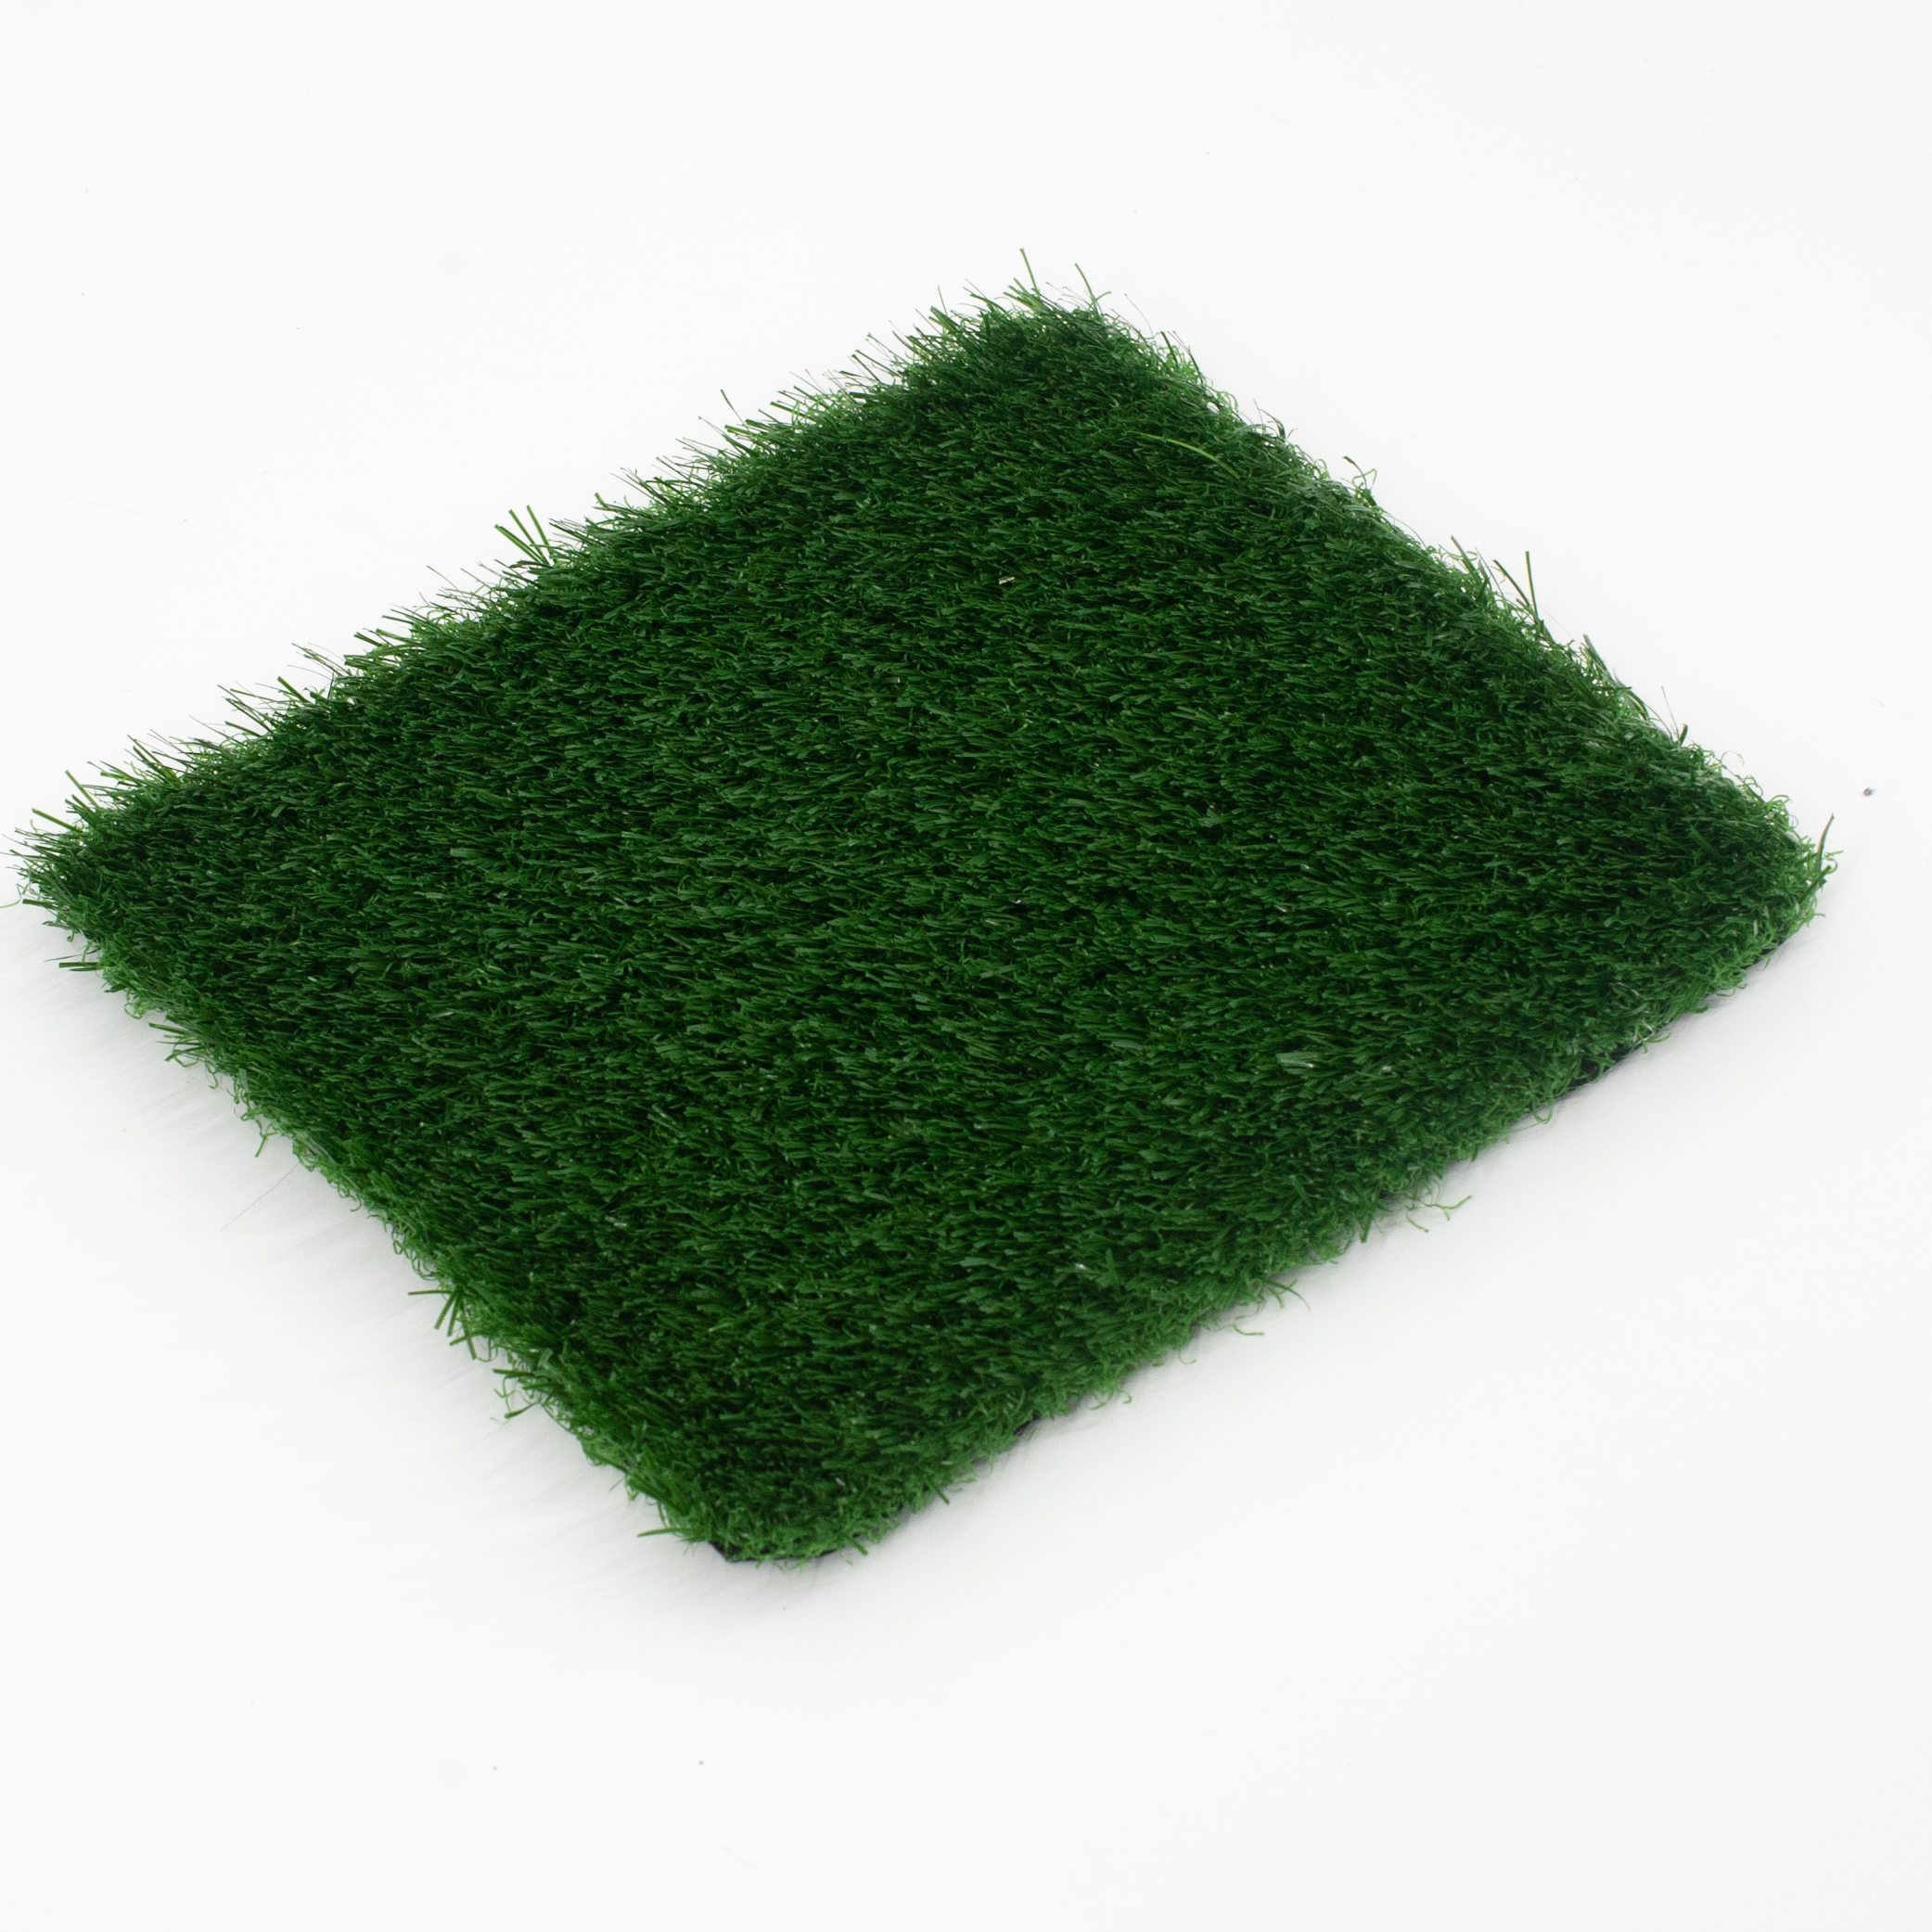 High Density Multi-Purpose Artificial Turf For Playground